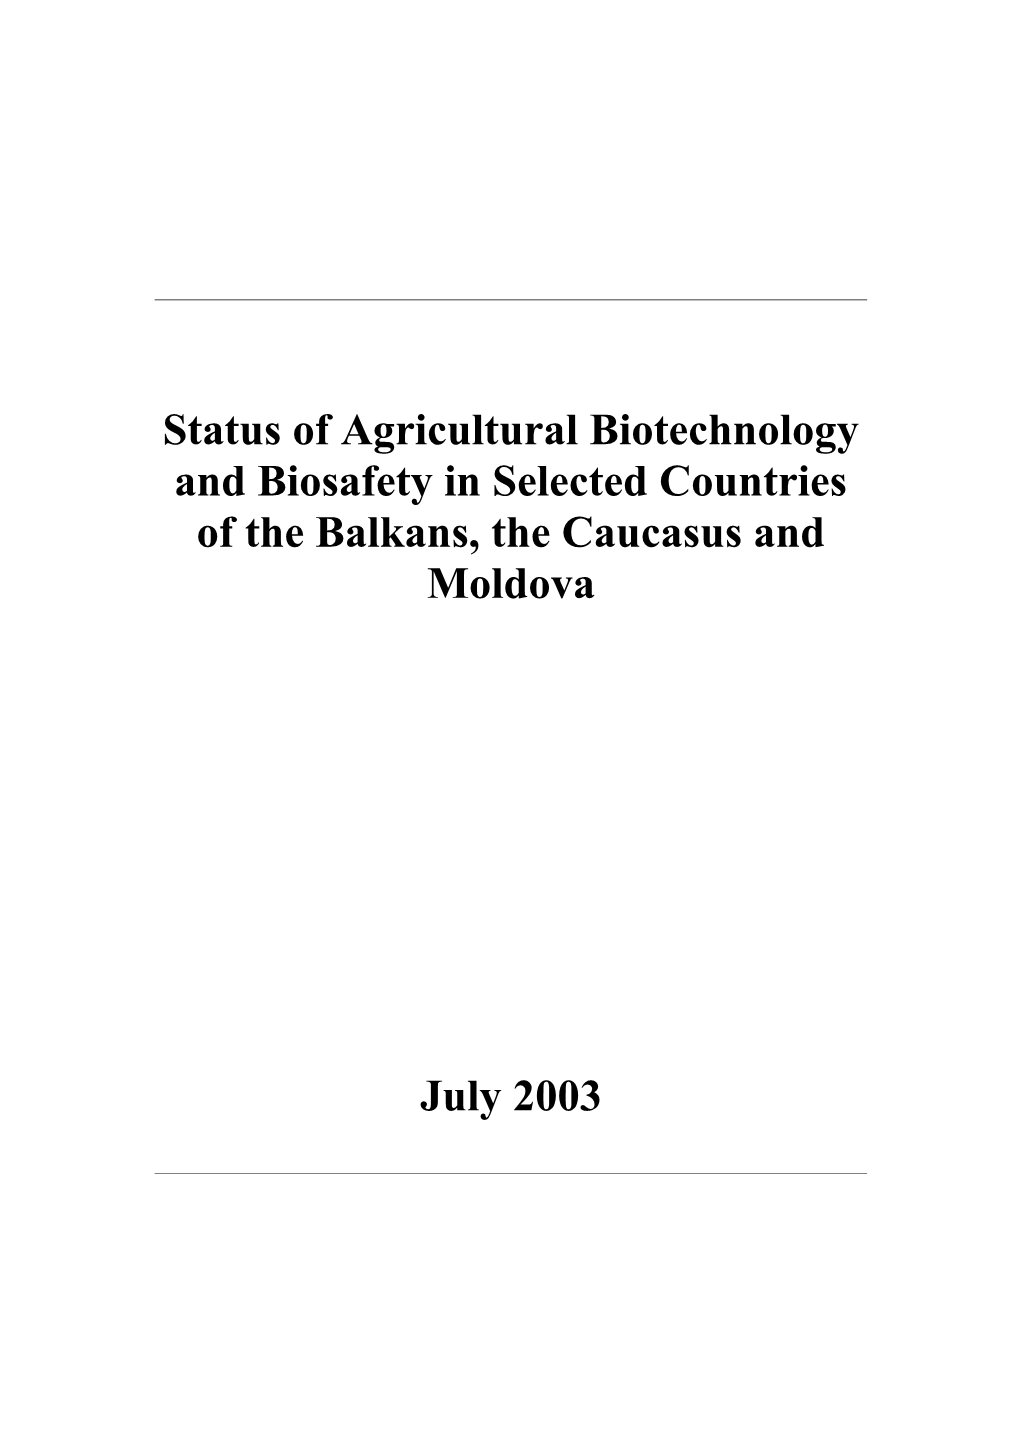 Status of Biotechnology and Biosafety in the Balkans and the Caucasus